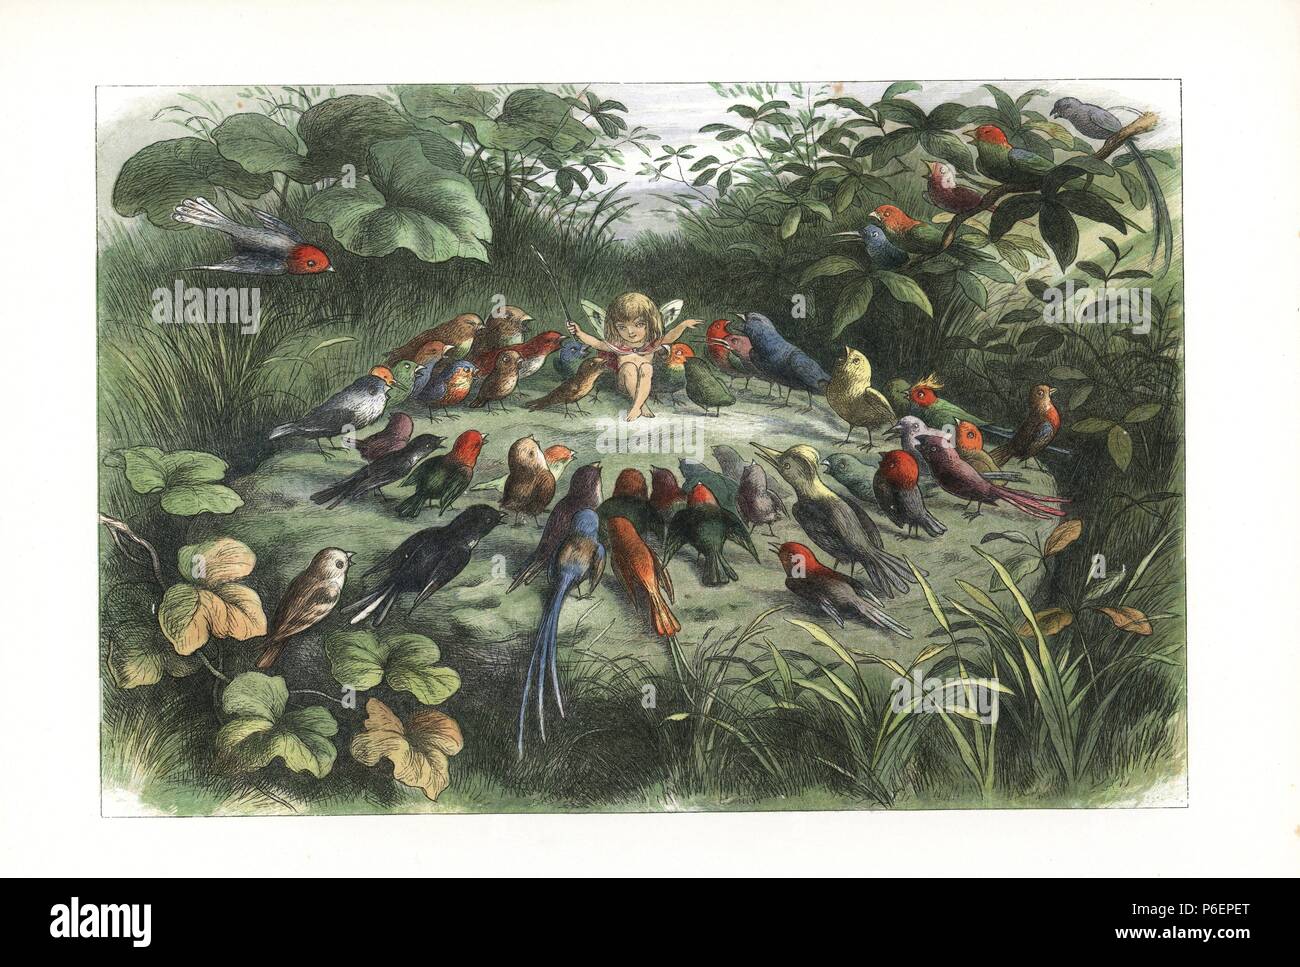 An elf teaching a choir of birds to sing. Handcoloured woodblock print by Edmund Evans after an illustration by Richard Doyle from In Fairyland, a series of Pictures from the Elf World, Longman, London, 1870. Stock Photo